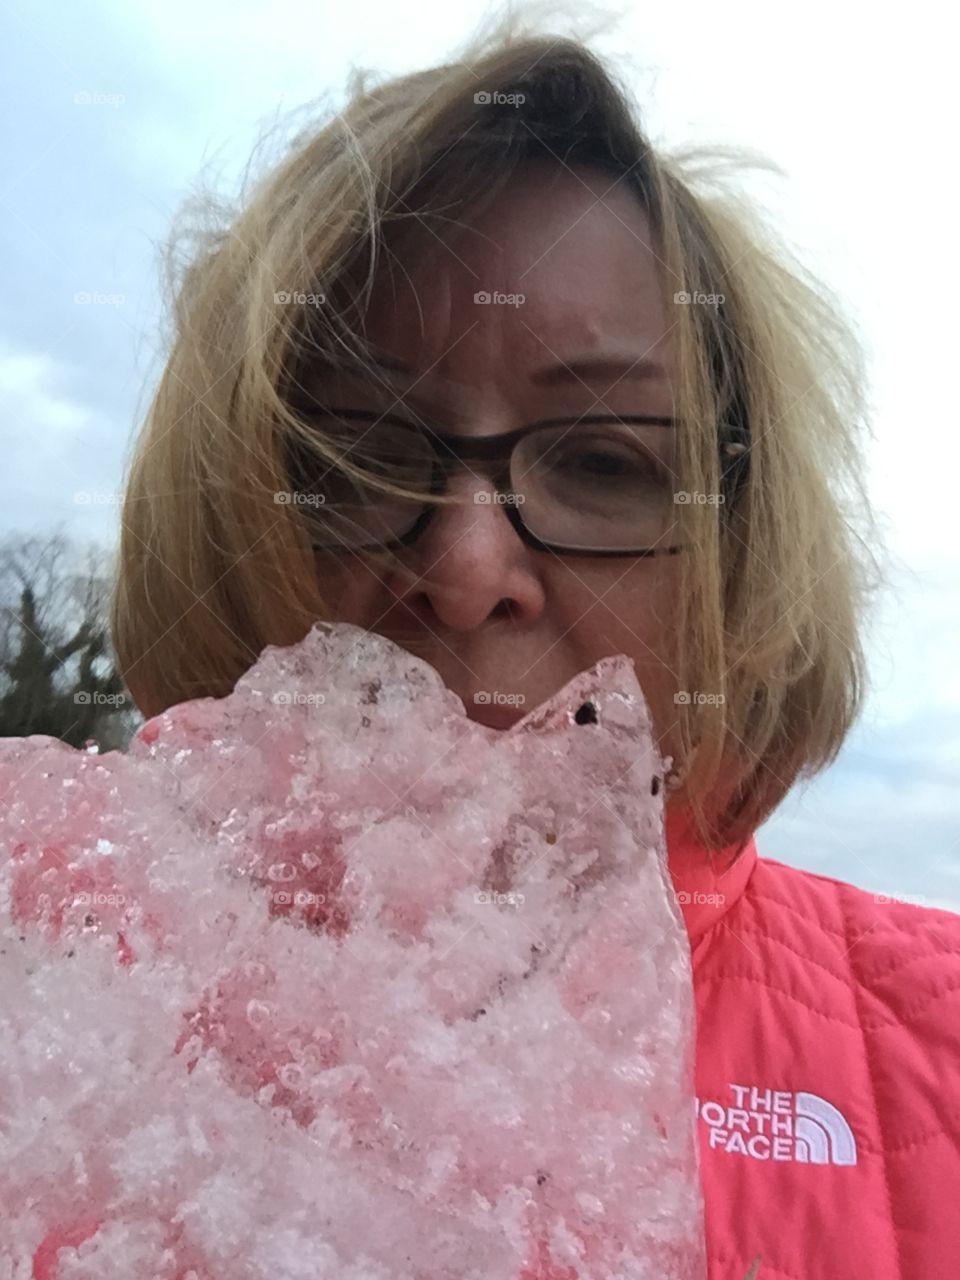 Huge Ice chunk from the Susquehanna river ice jam looks like a stawberry snow cone through my jacket